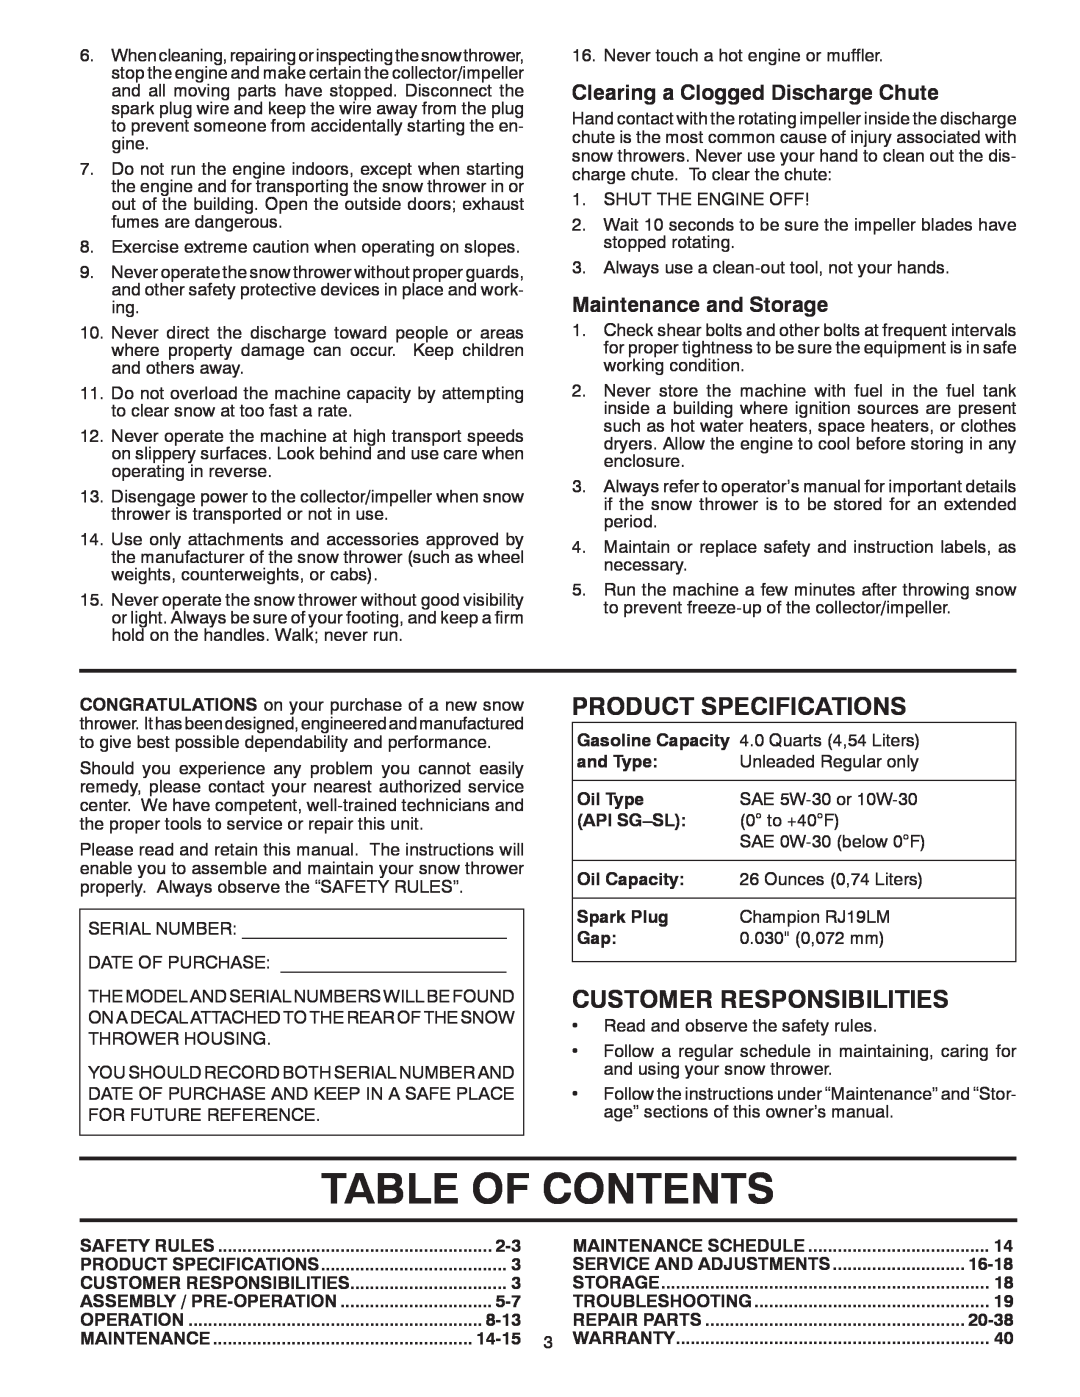 Poulan 420915 Table Of Contents, Product Specifications, Customer Responsibilities, Clearing a Clogged Discharge Chute 